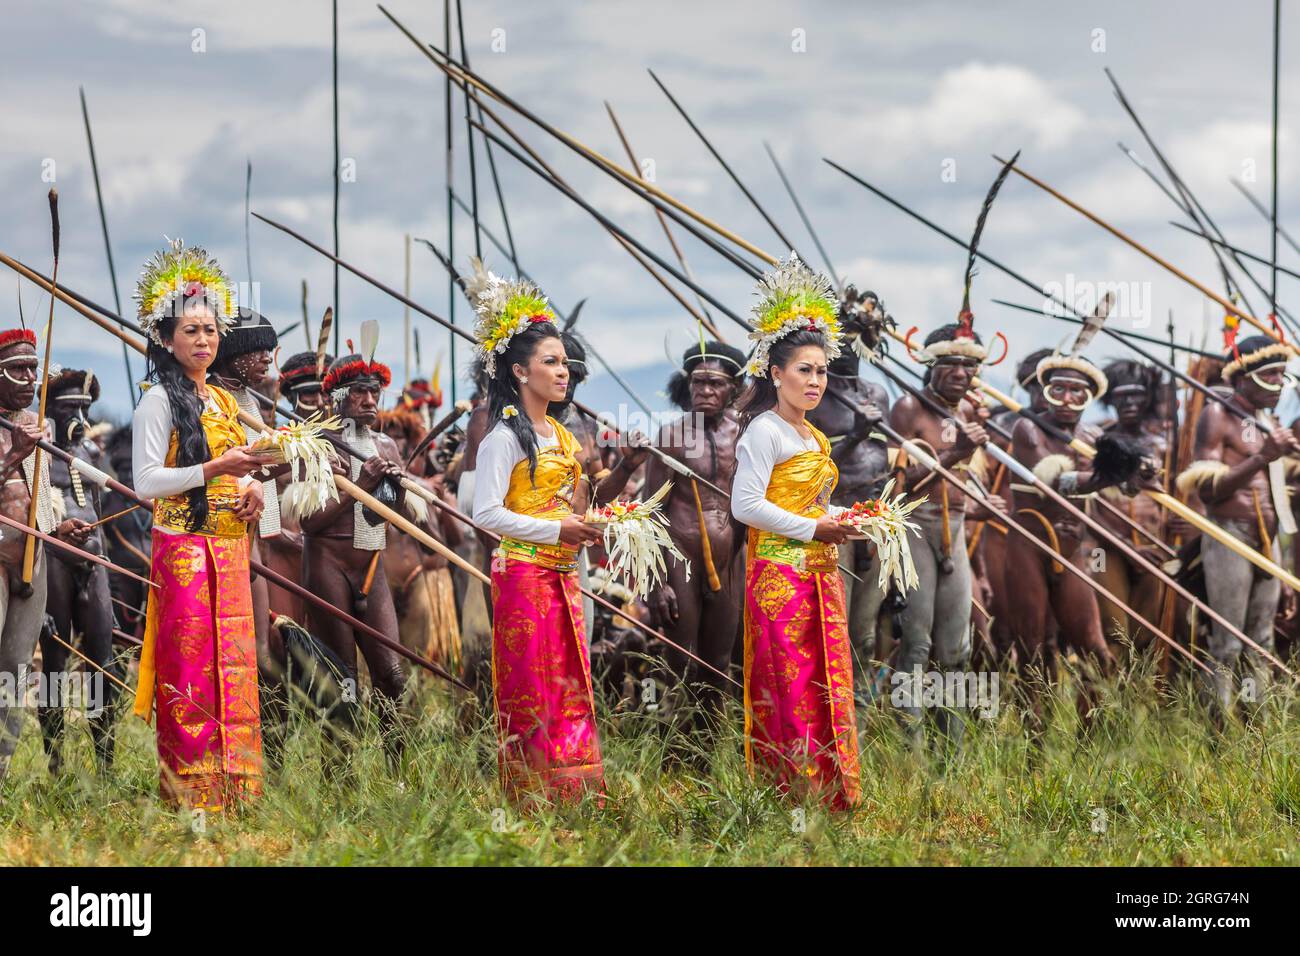 Indonesia, Papua, city of Wamena, Balinese women in traditional dress bringing a touch of national culture during a tribal war scene reenactment, by armed men from the Dani tribe. Baliem Valley Cultural Festival, every August, tribes come together to perform ancestral war scenes, parade and dance in traditional clothes Stock Photo